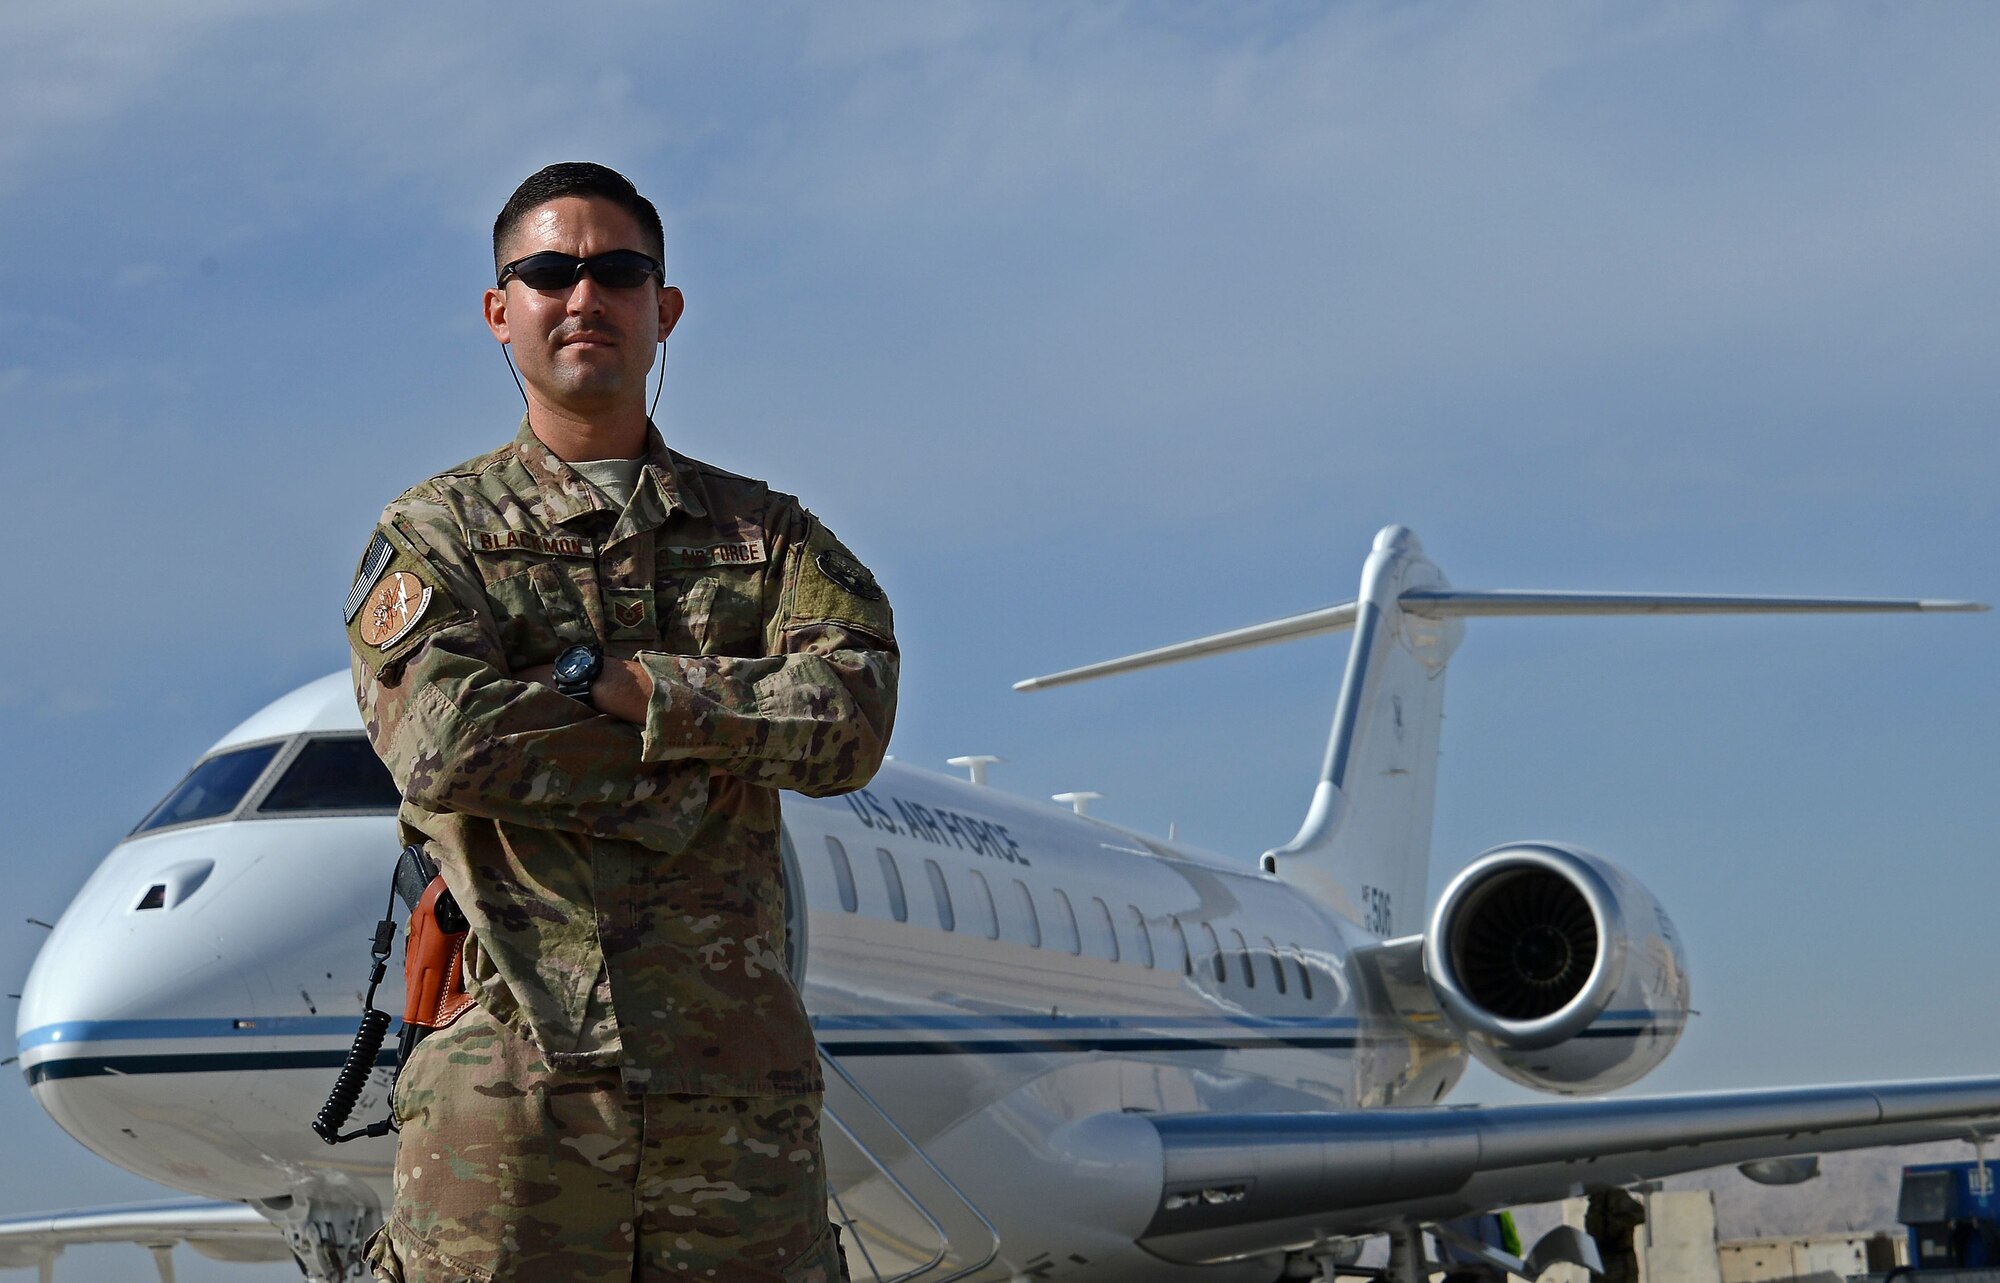 Tech. Sgt. Andrew Blackmon, 430th Expeditionary Electronic Combat Squadron aircrew flight equipment technician, poses for a photo Nov. 28, 2017 at Kandahar Airfield, Afghanistan.